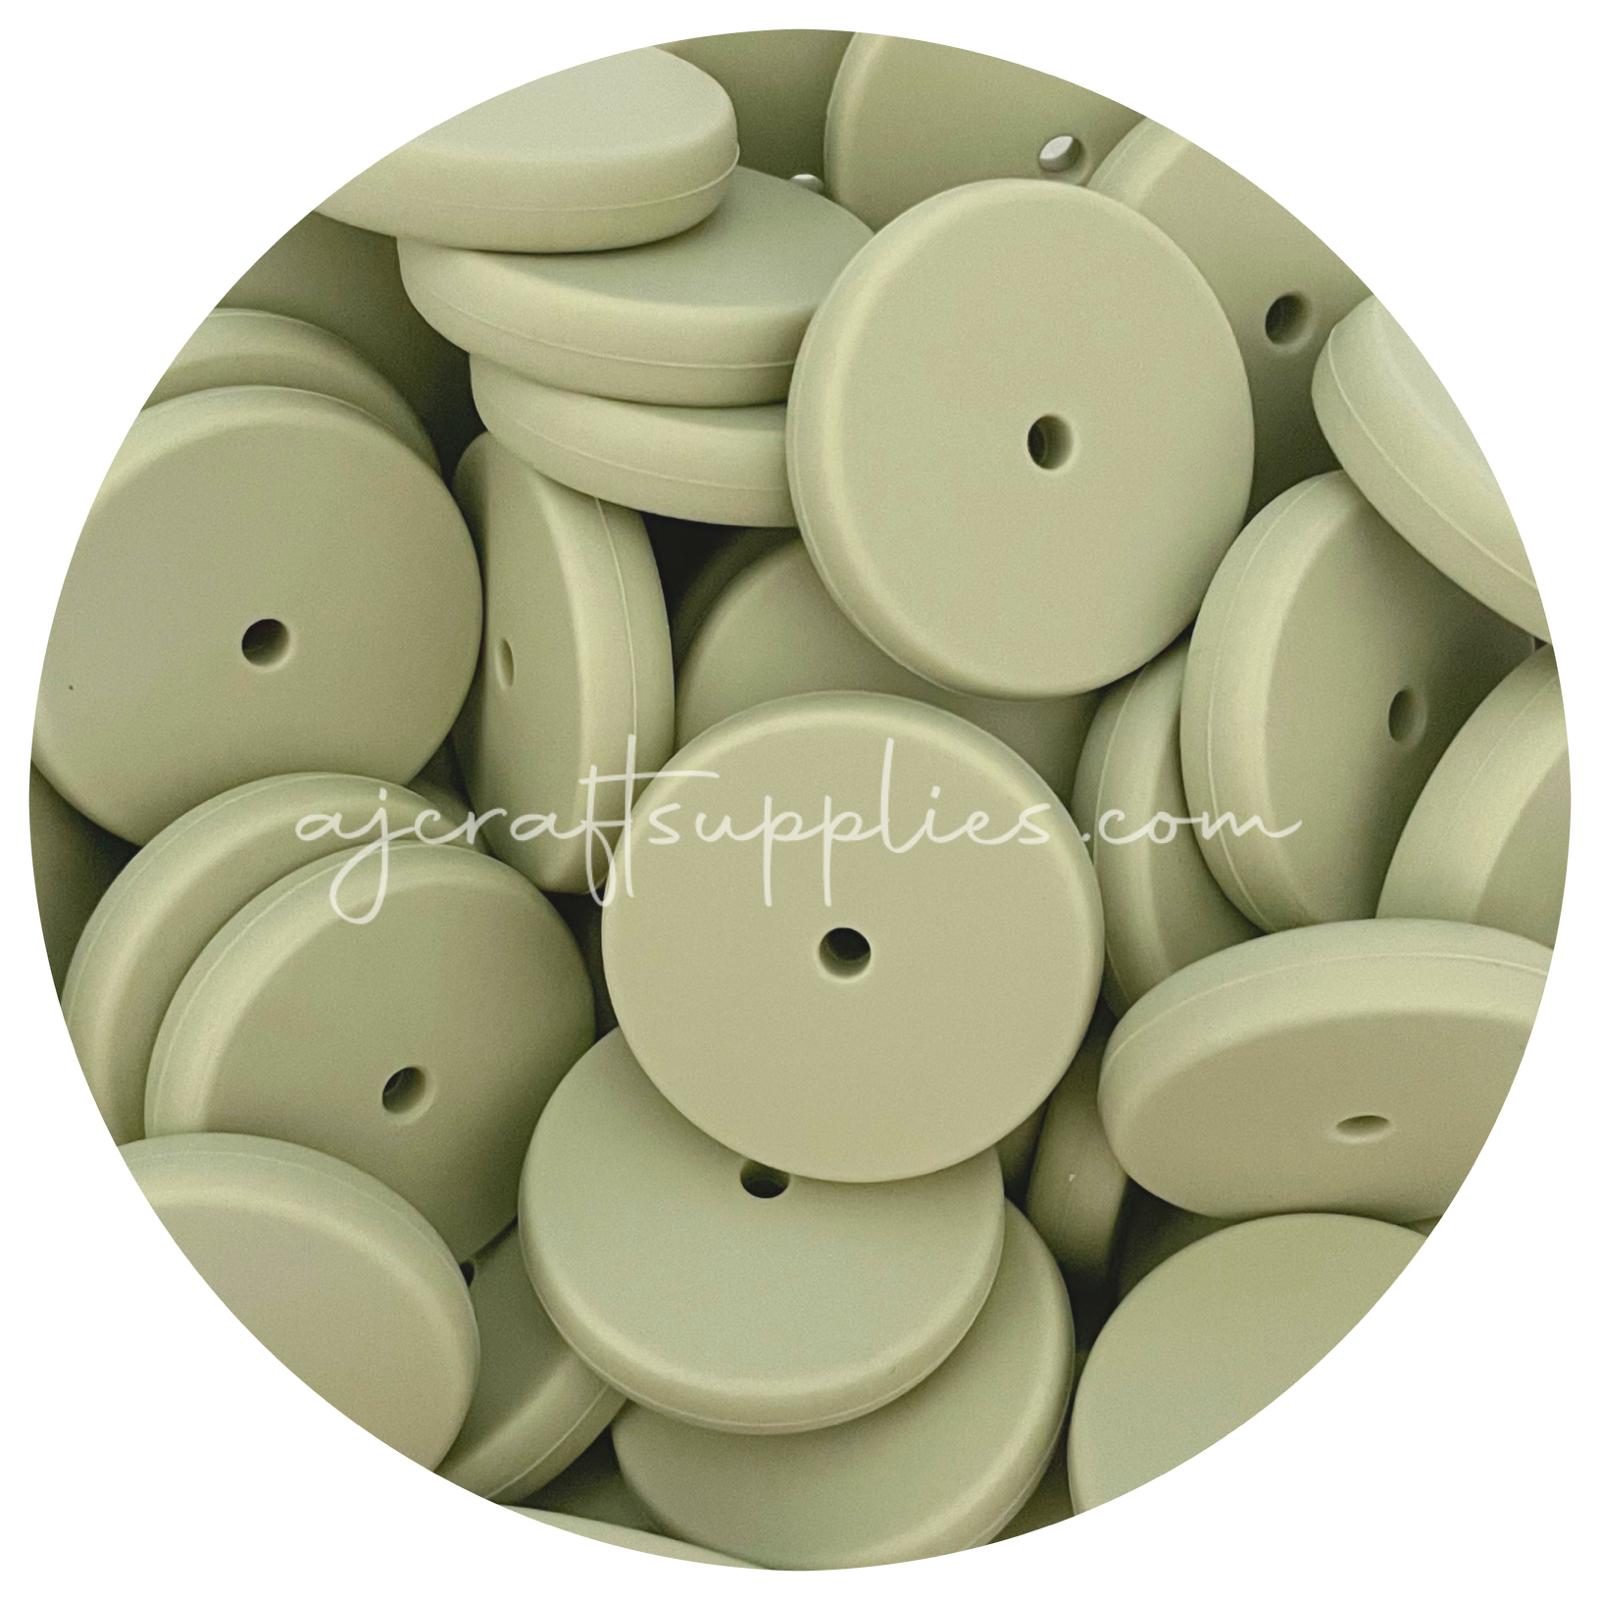 Sage Green - 25mm Flat Coin Silicone Beads - 5 beads